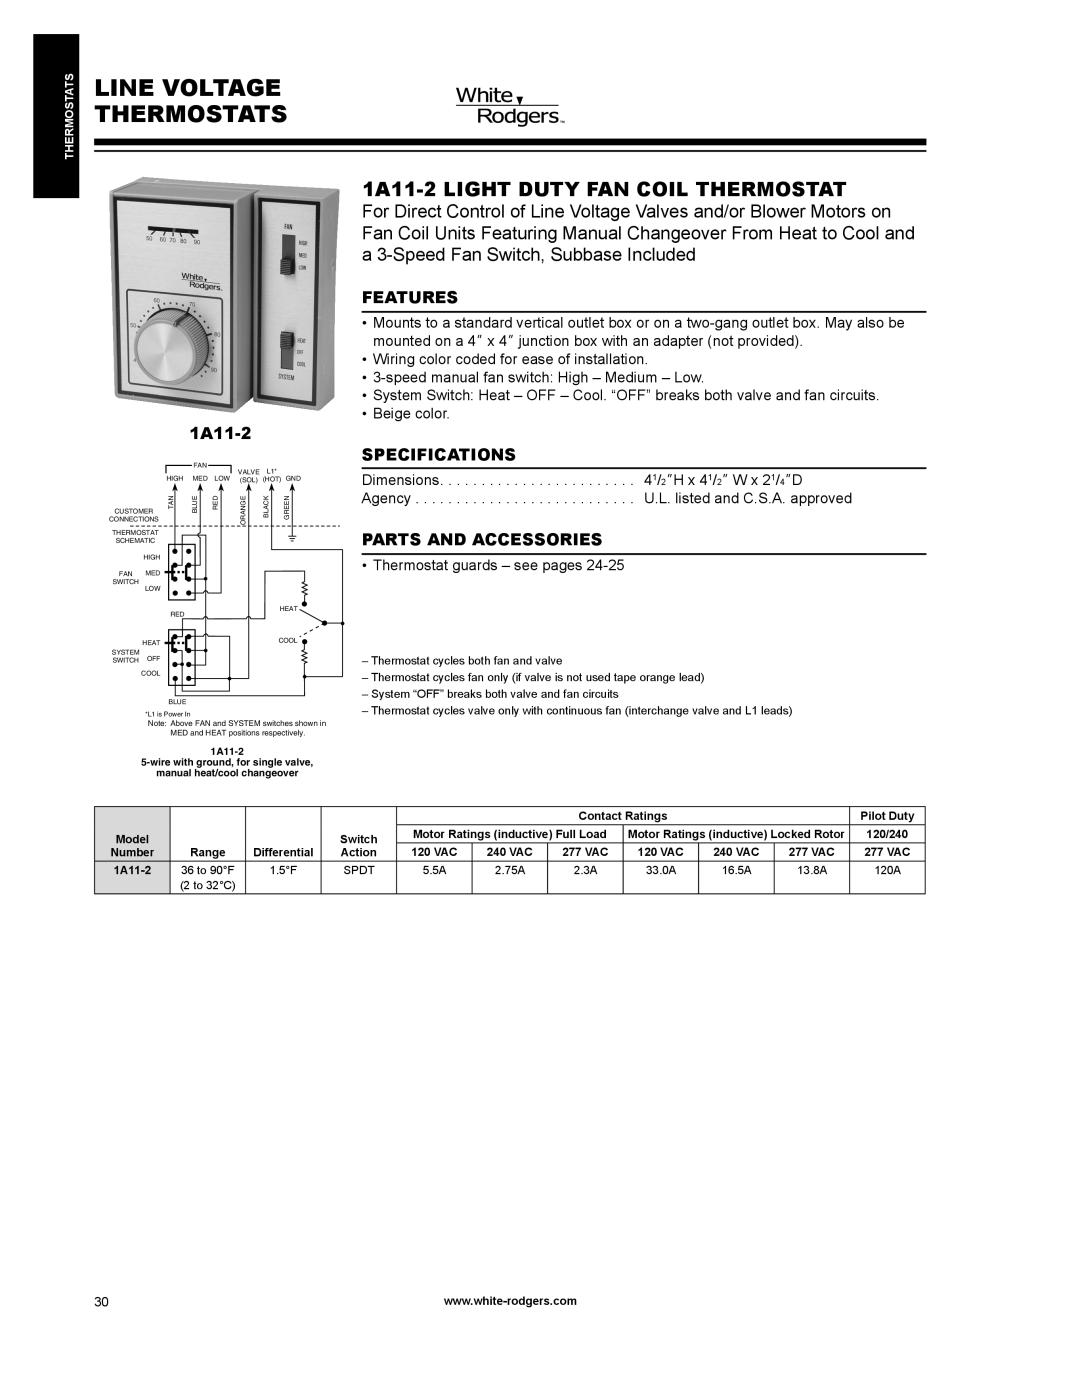 Emerson 1A11-2 dimensions Line Voltage Thermostats, 1a11-2 LIGHT DUTY FAN COIL THERMOSTAT, Features, Specifications 